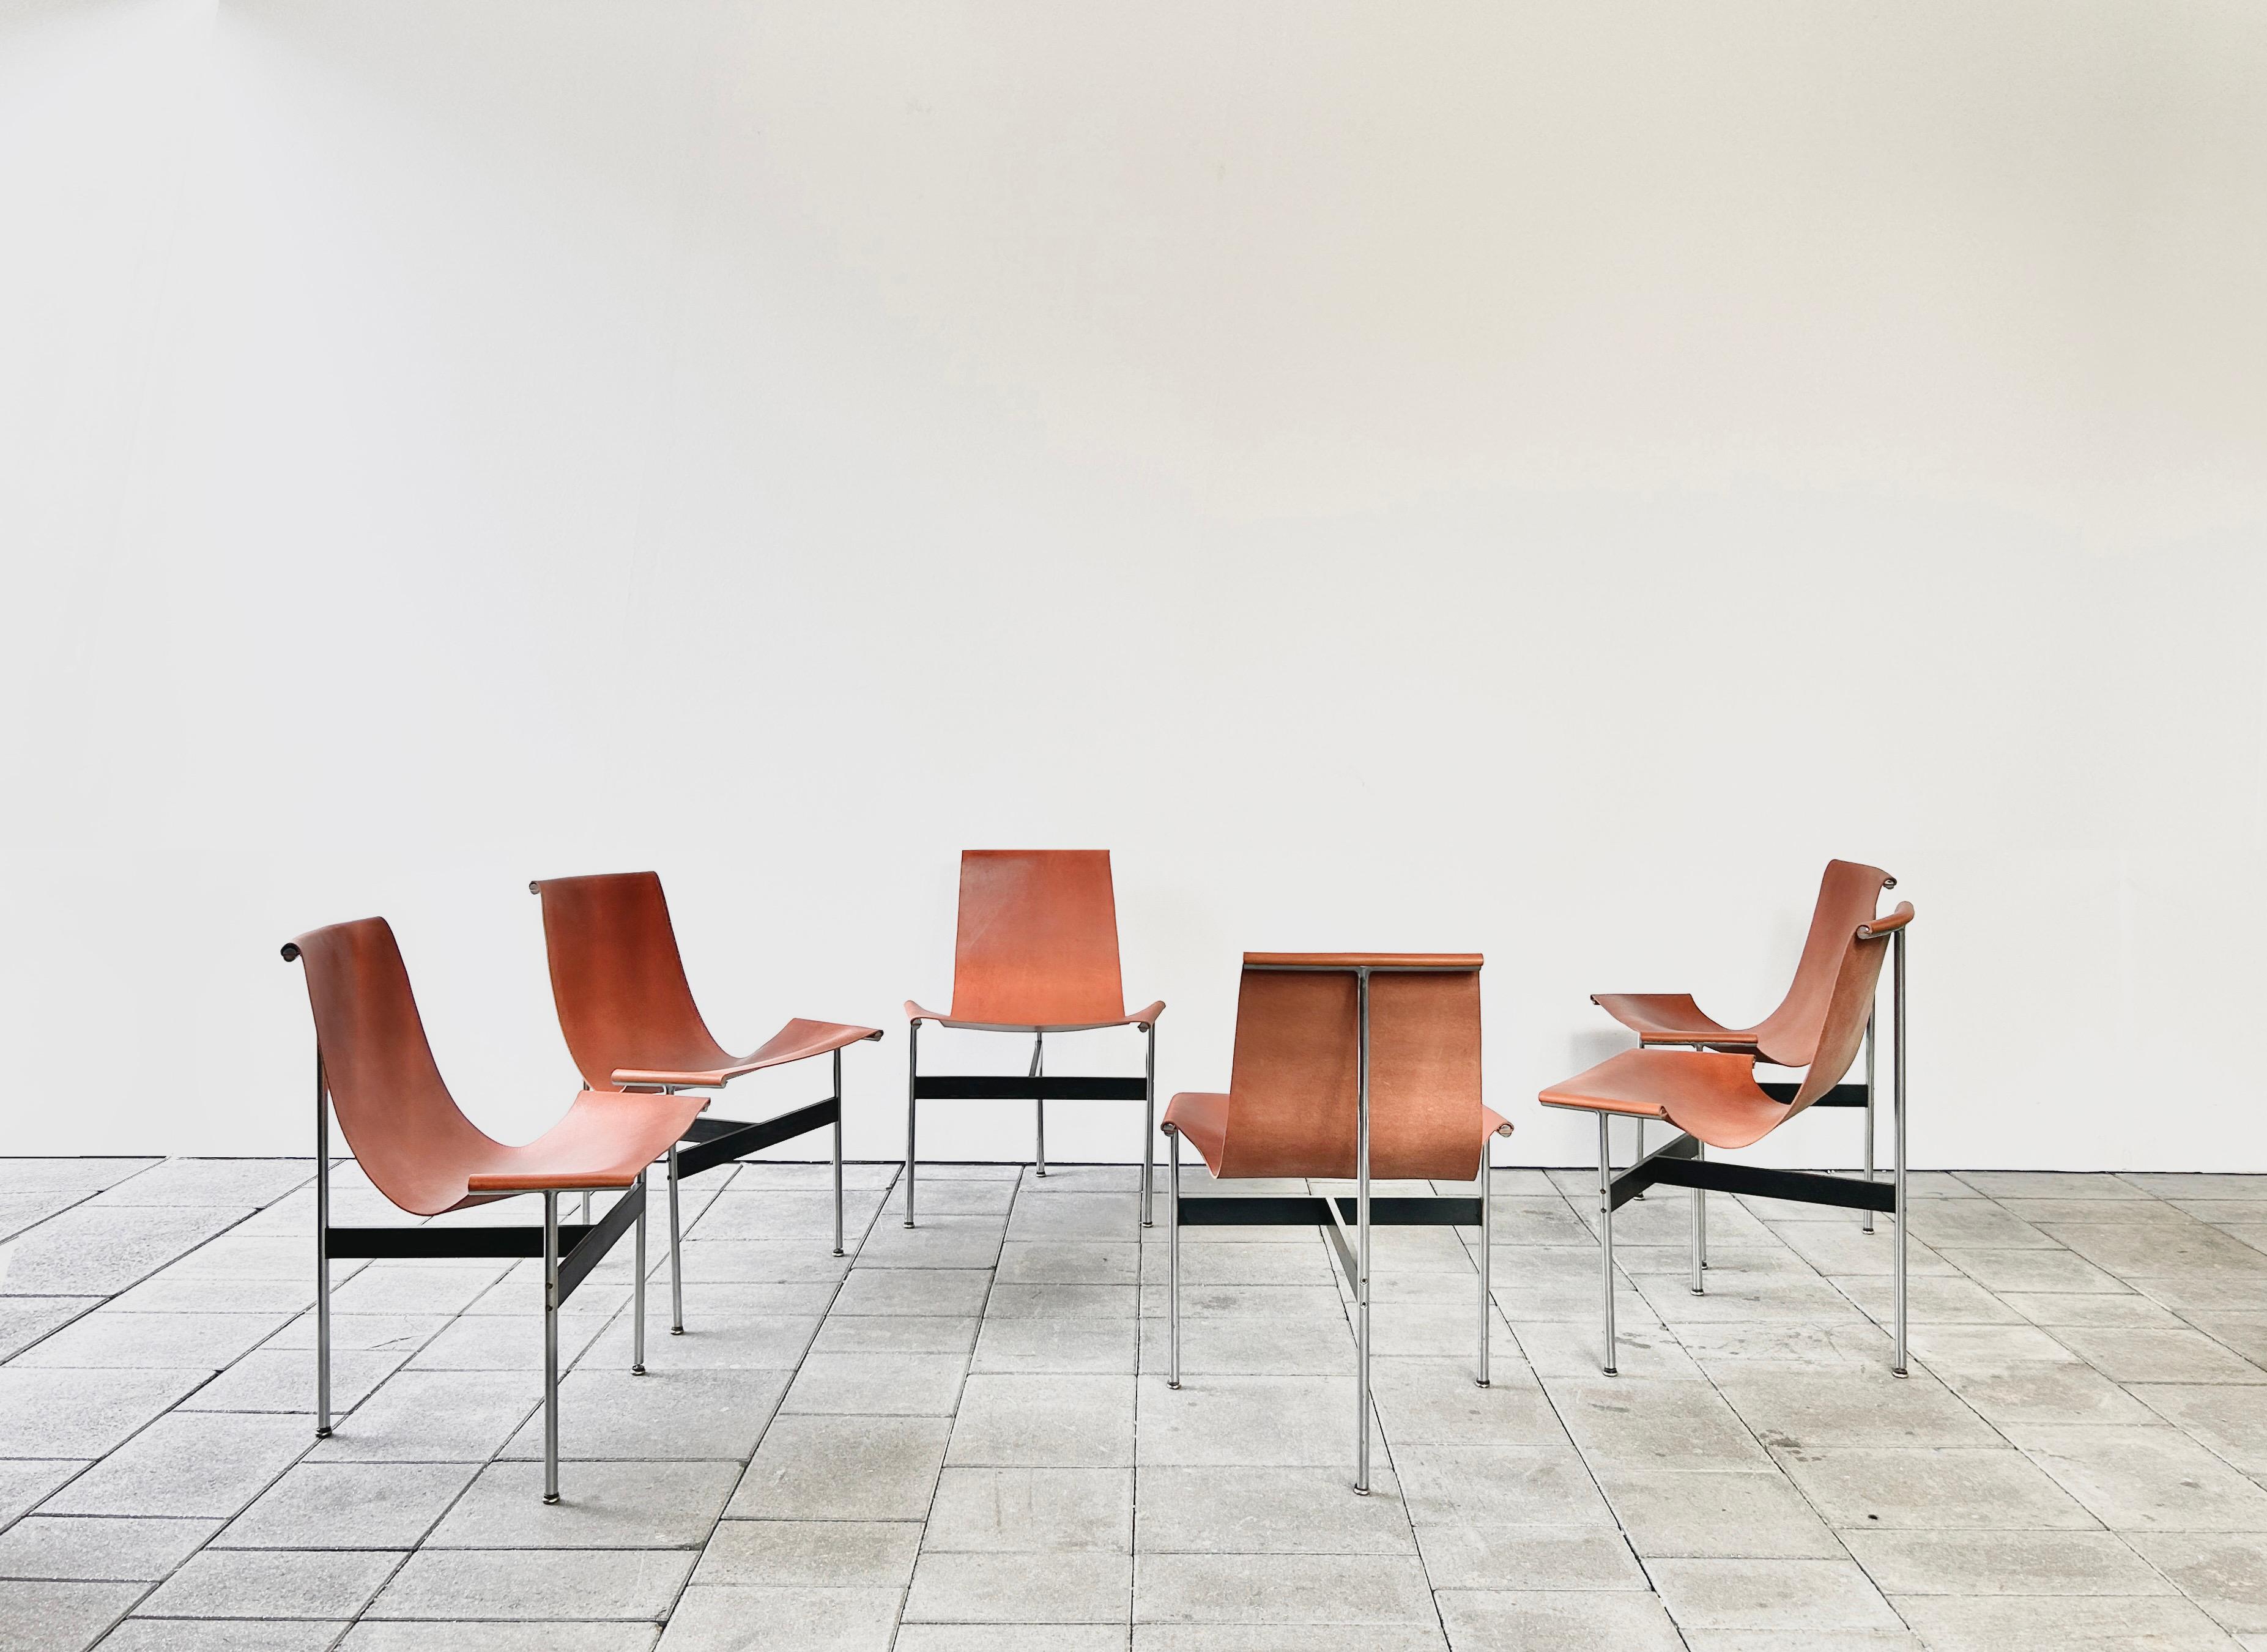 Set of 6 T-chairs designed by William Katavolos, Ross Litell & David Kelley in the early 1950ies


Hardly any other chair konjugates one particular shape comparable to the T-Chair: T-legs, assembled with a T-cross brace under the seat & a T-shaped